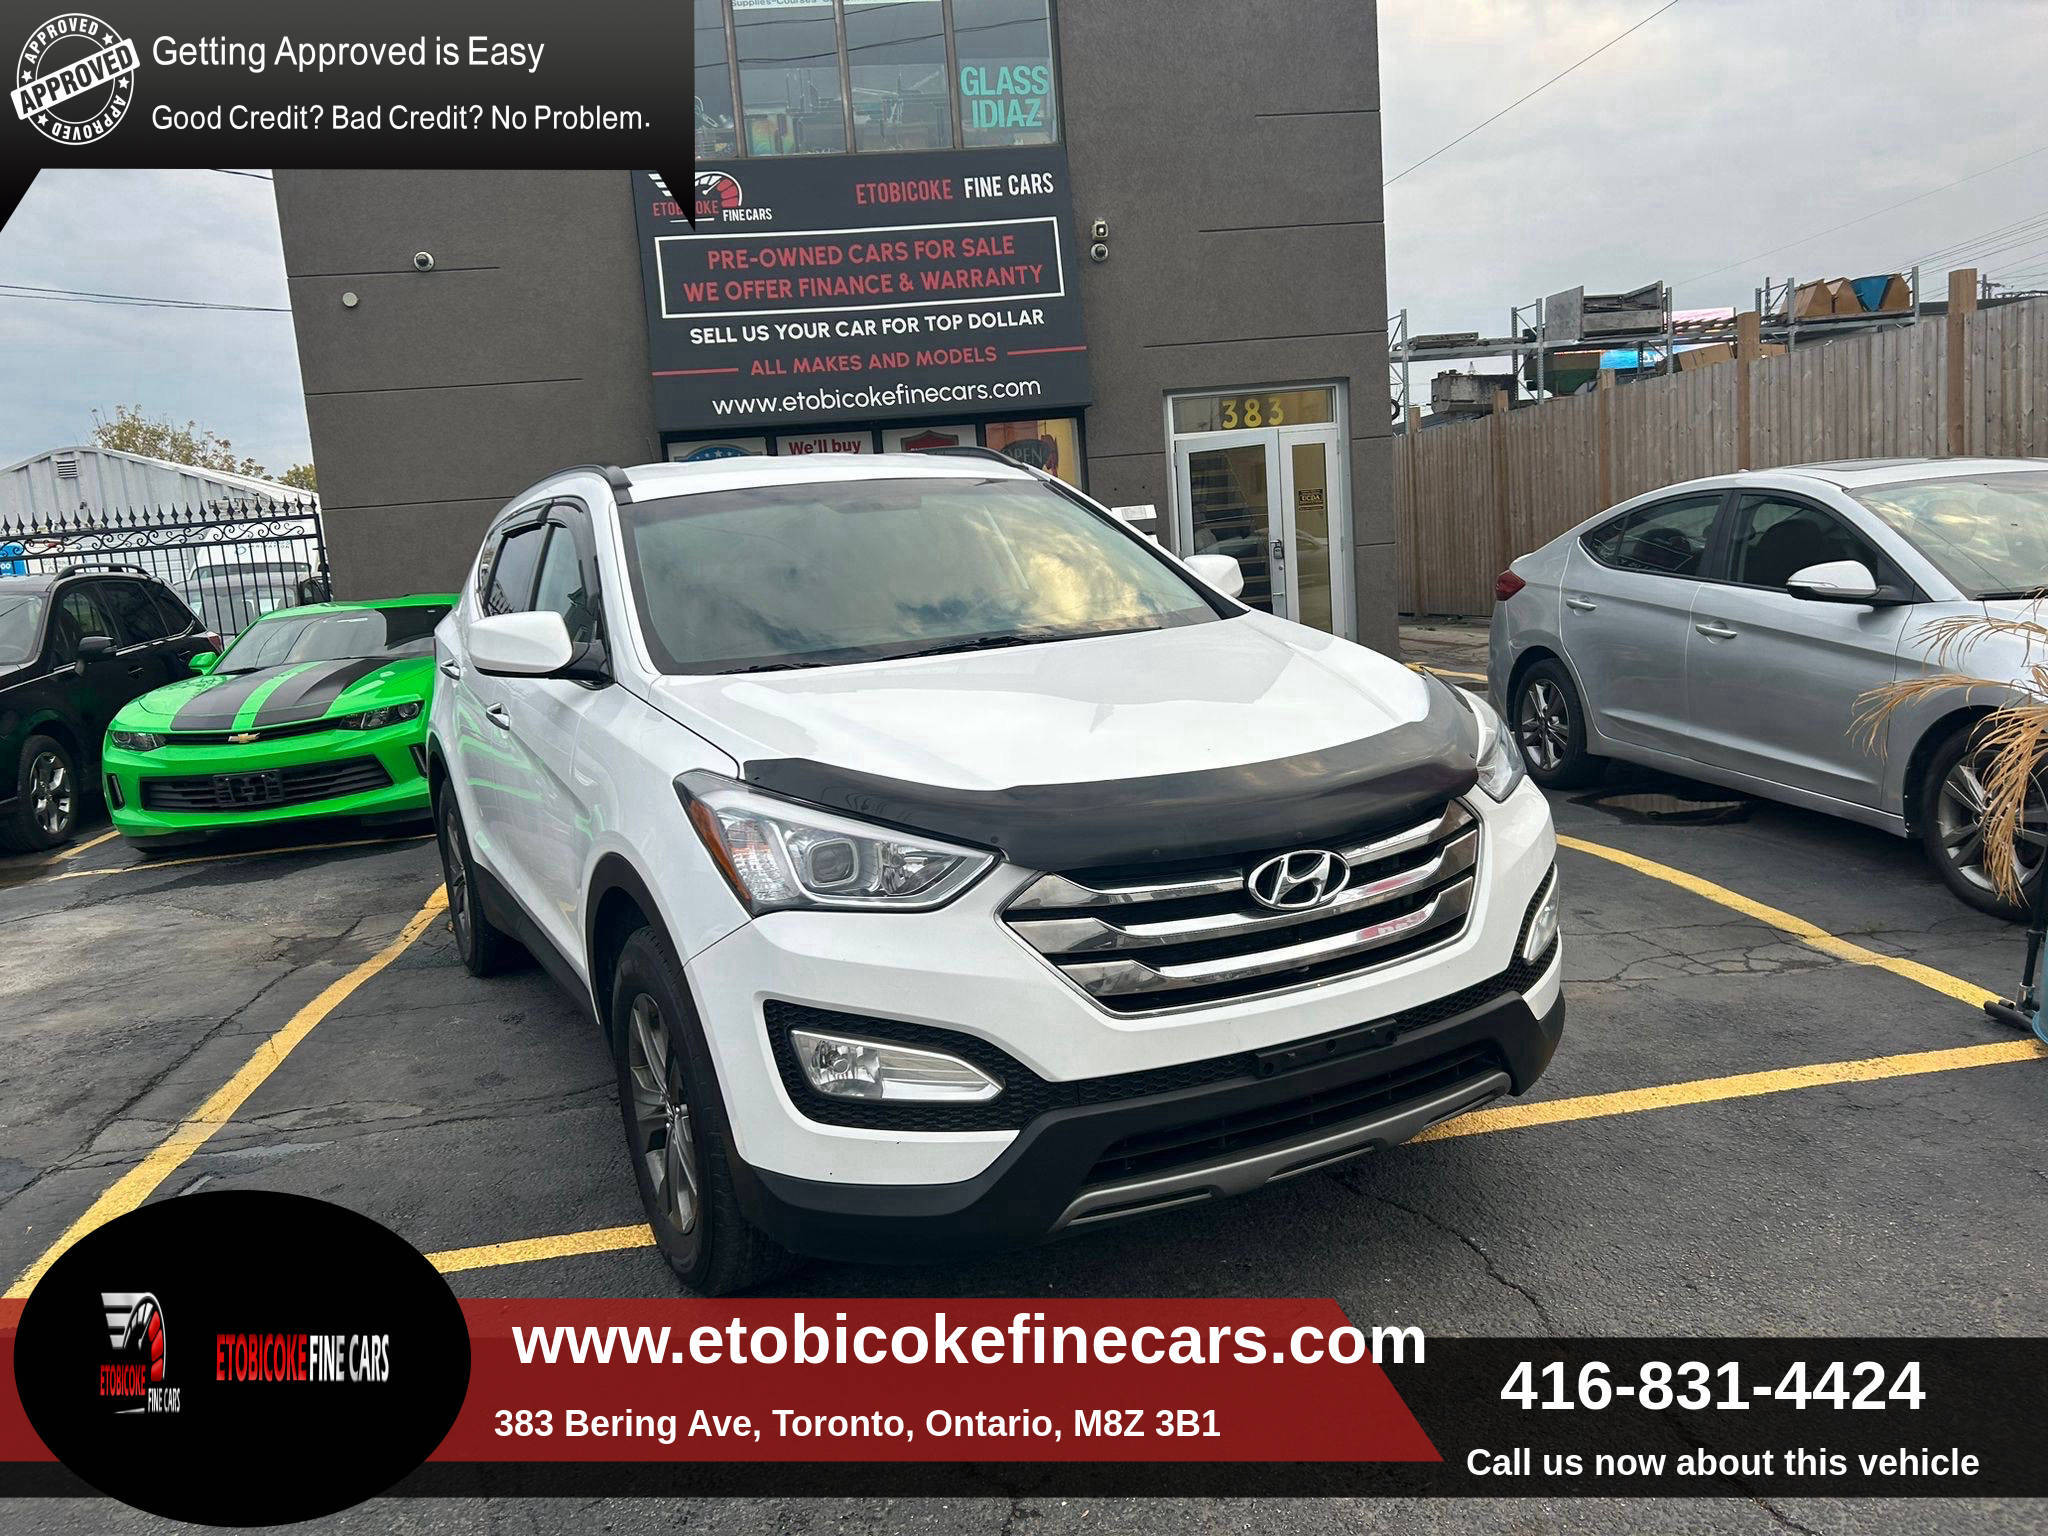 2013 Hyundai Santa Fe FWD 4dr 2.4L Auto Premium FULLY CERTIFIED WITH FRE